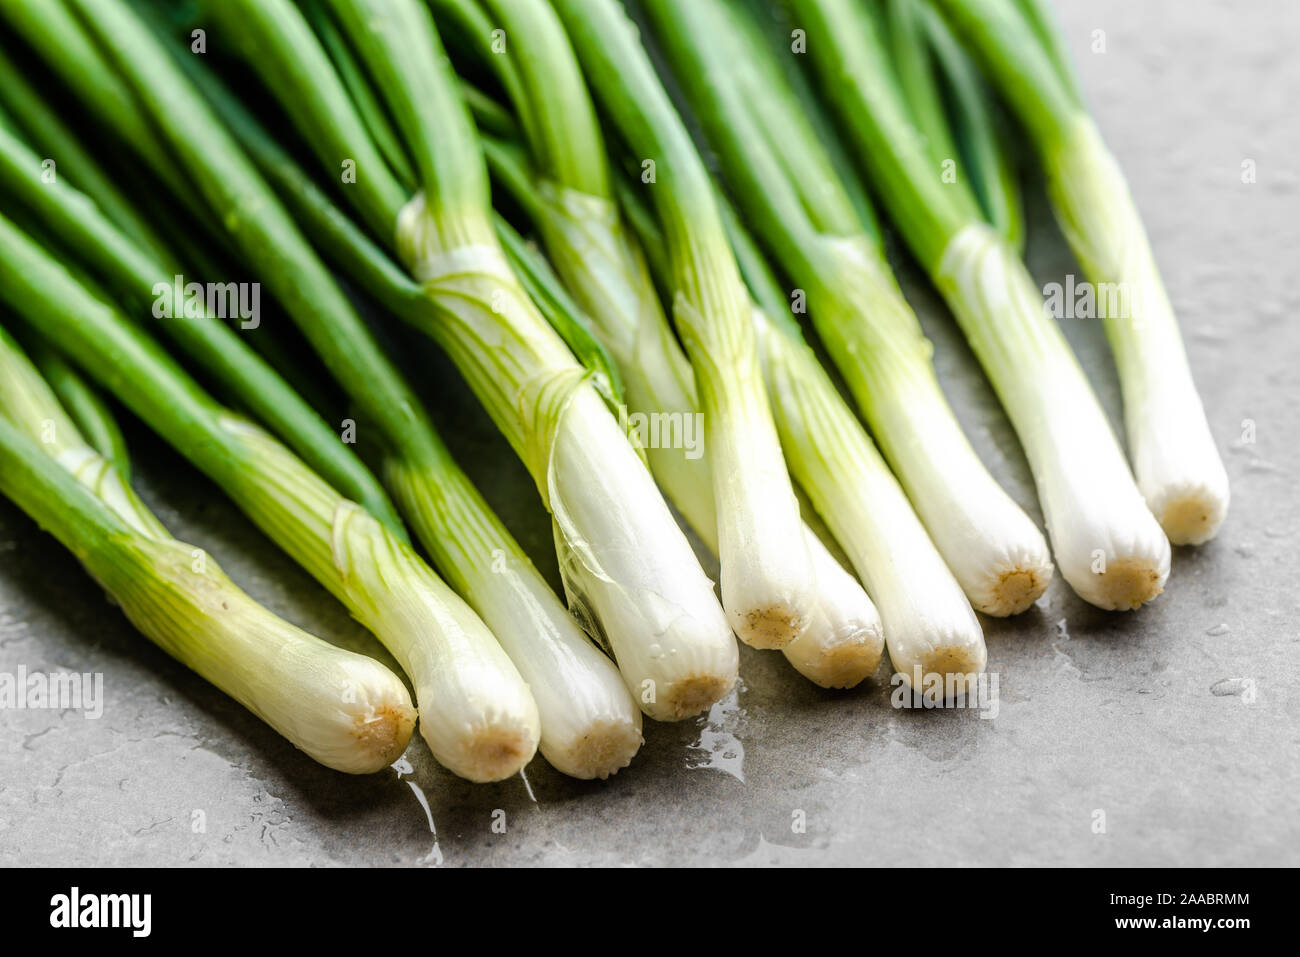 Green onion with fresh scallion. Organic vegetables freshly harvested from the garden Stock Photo